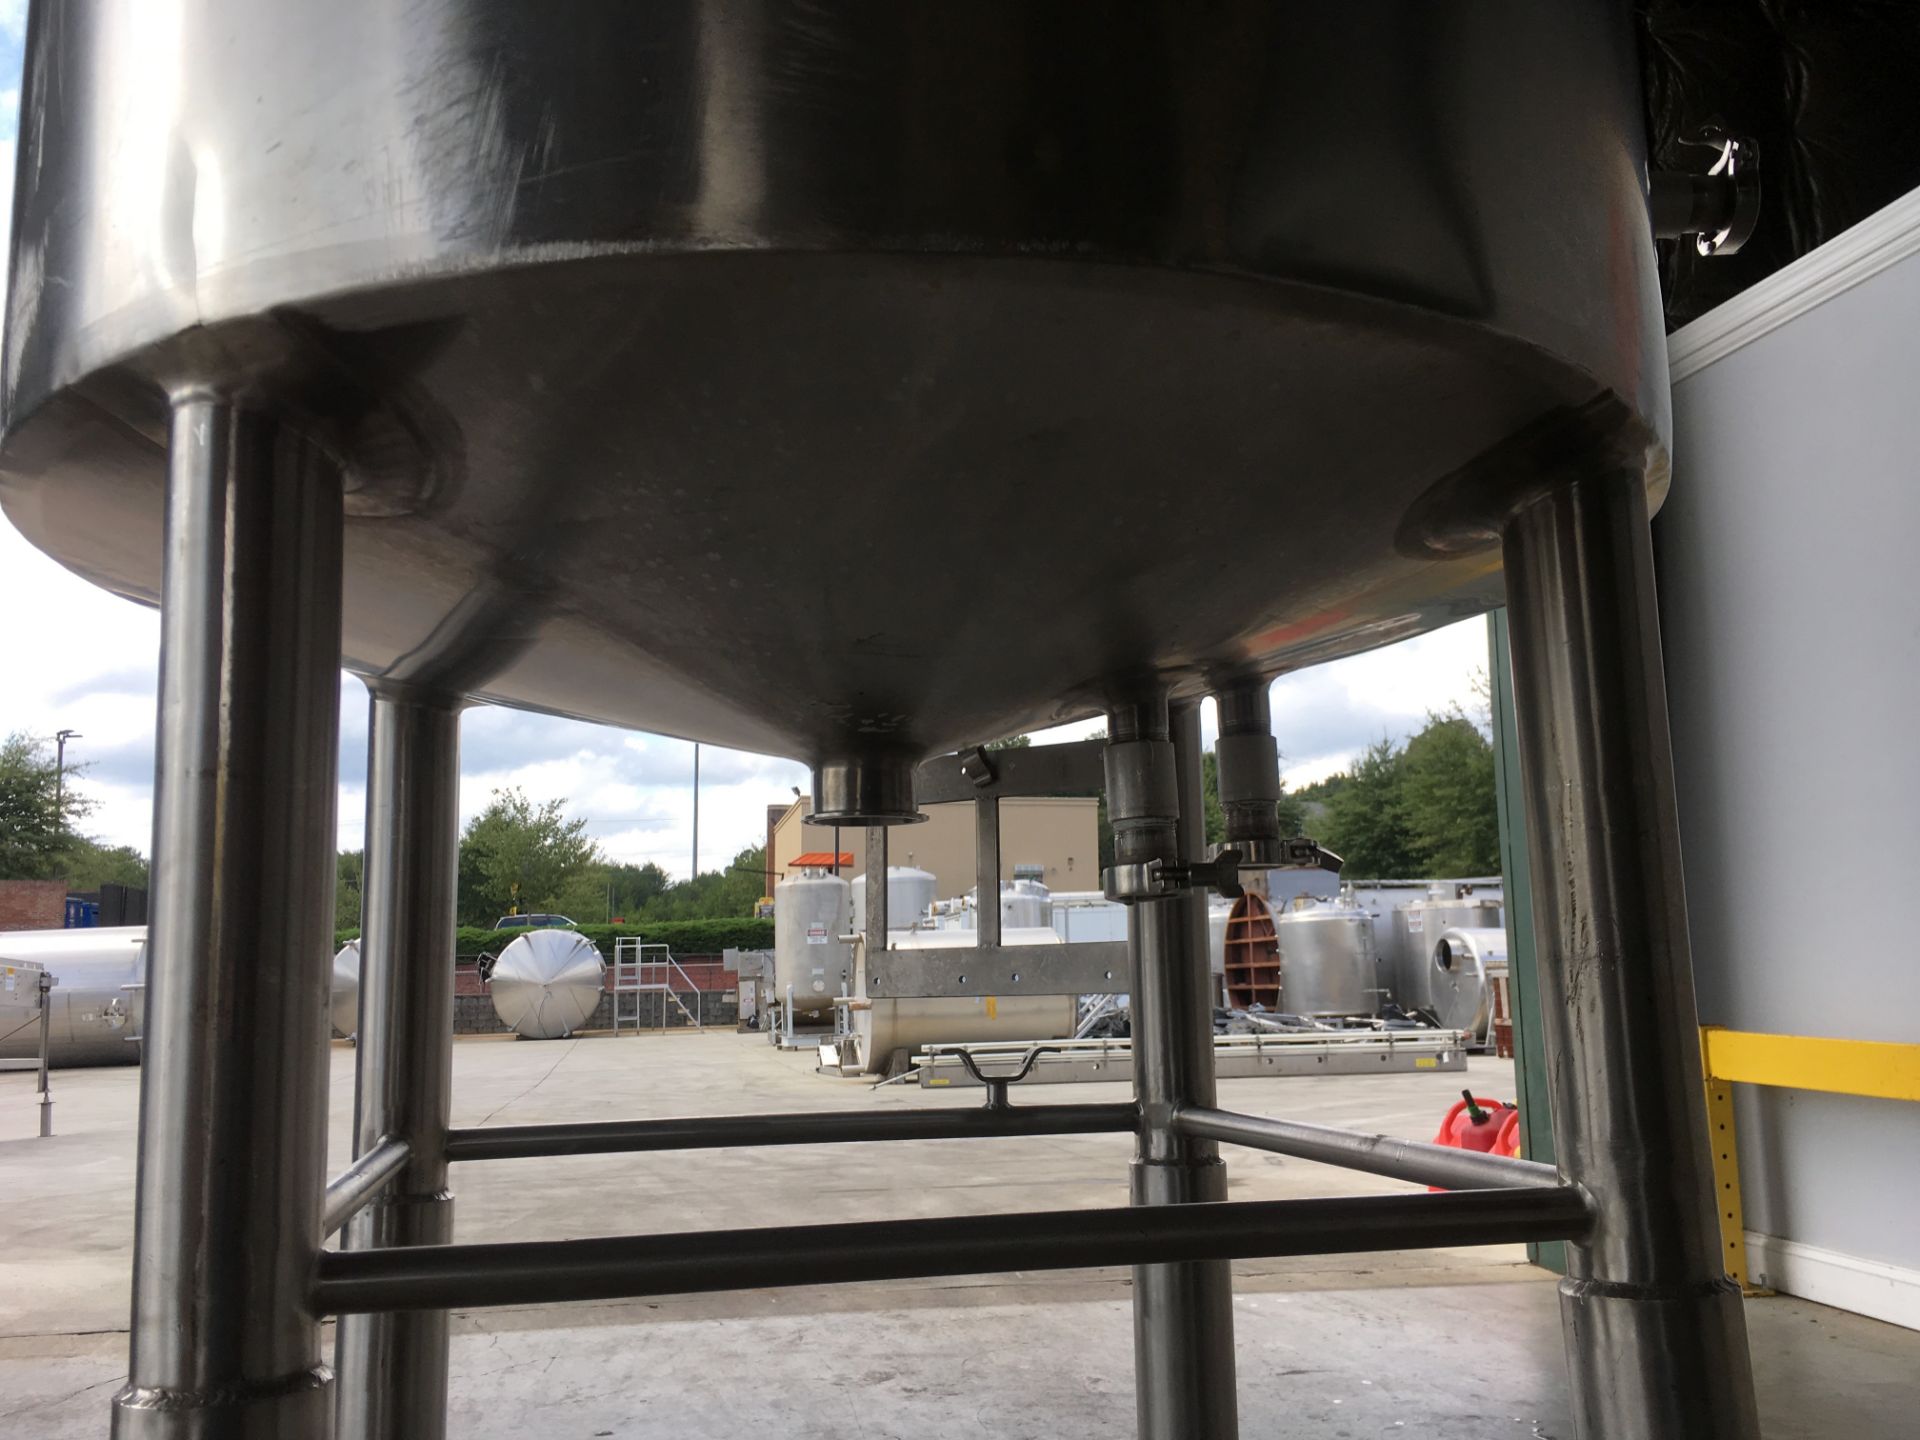 200 Gallon Stainless Steel Jacketed Tank with Top Mixer, Top Manhole, High Shear Mixer Blade, Baldor - Image 4 of 10